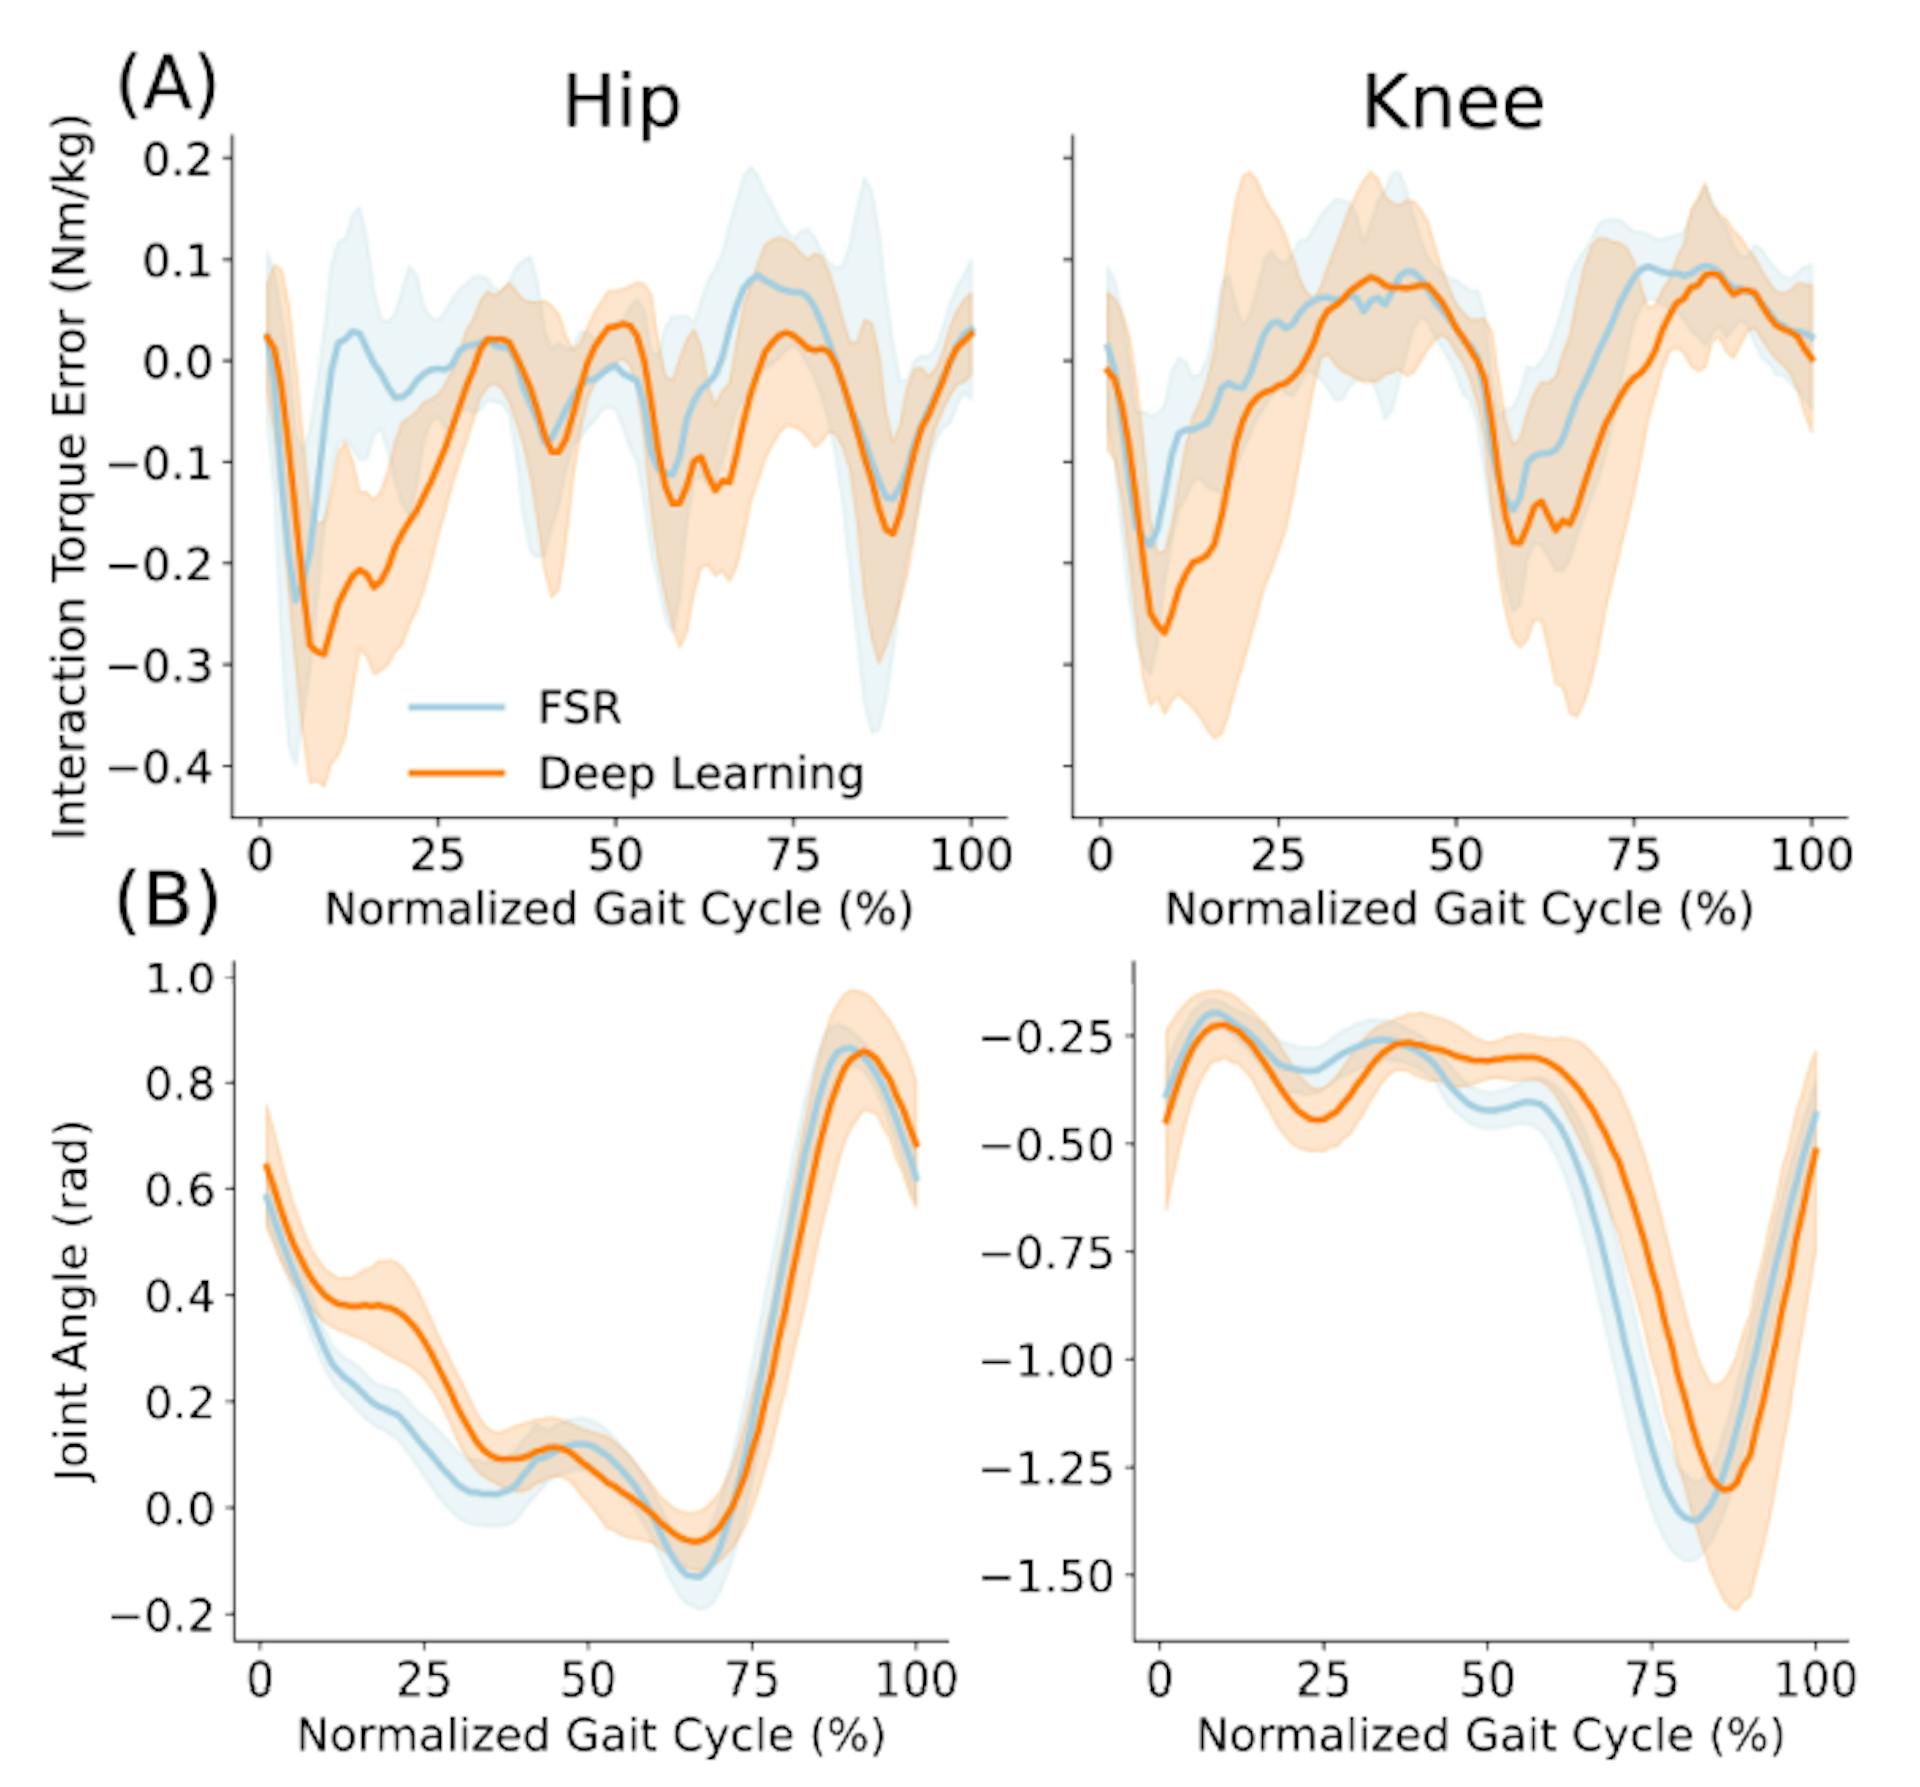 Fig. 7: Haptic transparency performance of the proposed deep-learning method during overground walking. (A) Interaction torque across normalized gait cycle, for a representative user, during overground walking. (B) Hip and Knee joint angles obtained with deep learning (orange) and FSR pad sensors (blue) conditions for a representative user. Shaded error bars indicate ± one standard deviation relative to the mean.